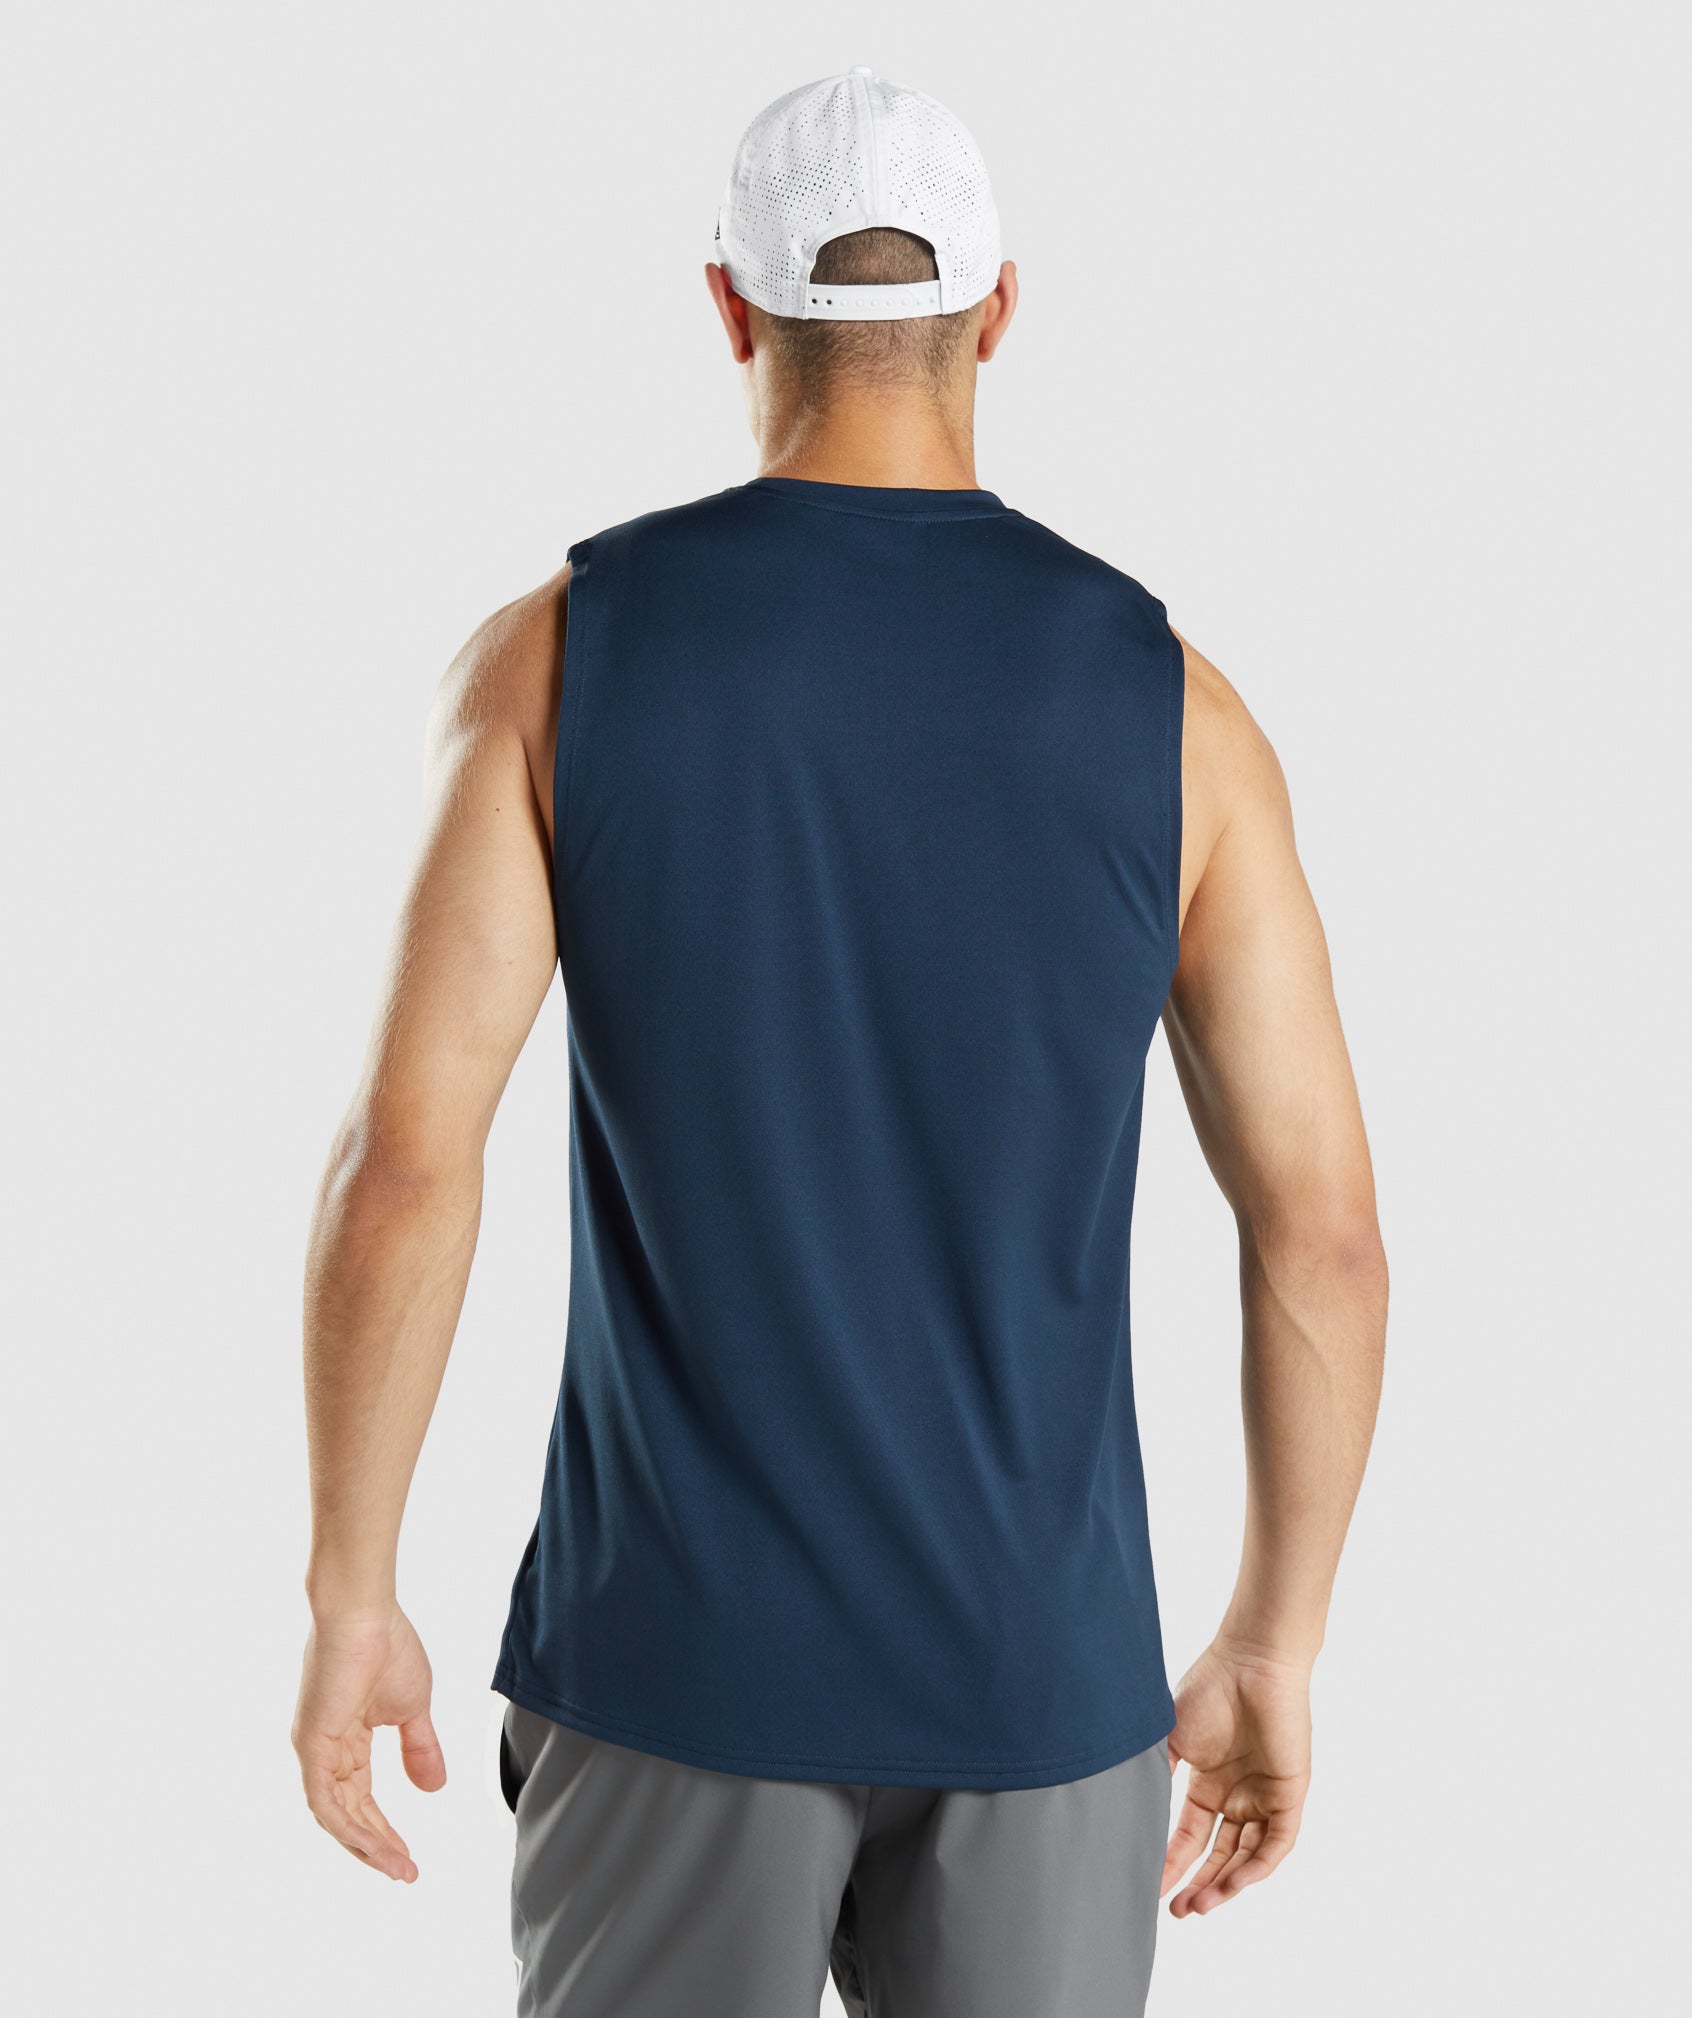 Arrival Sleeveless T-Shirt in Navy - view 2